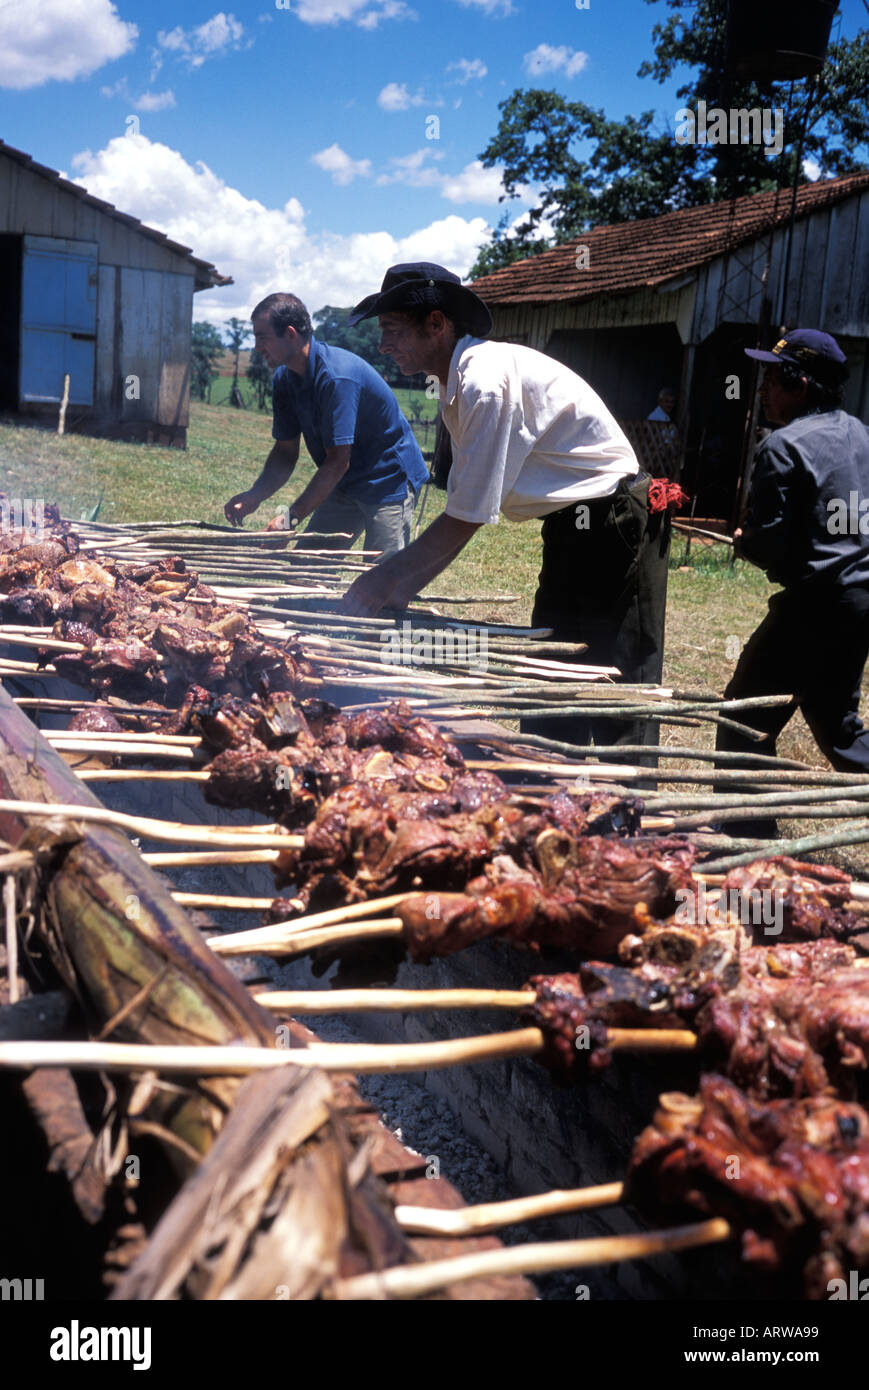 Paraguayan men preparing meat on skewers over a parrilla a barbeque an open fire pit near Trinidad and Jesus Paraguay Stock Photo